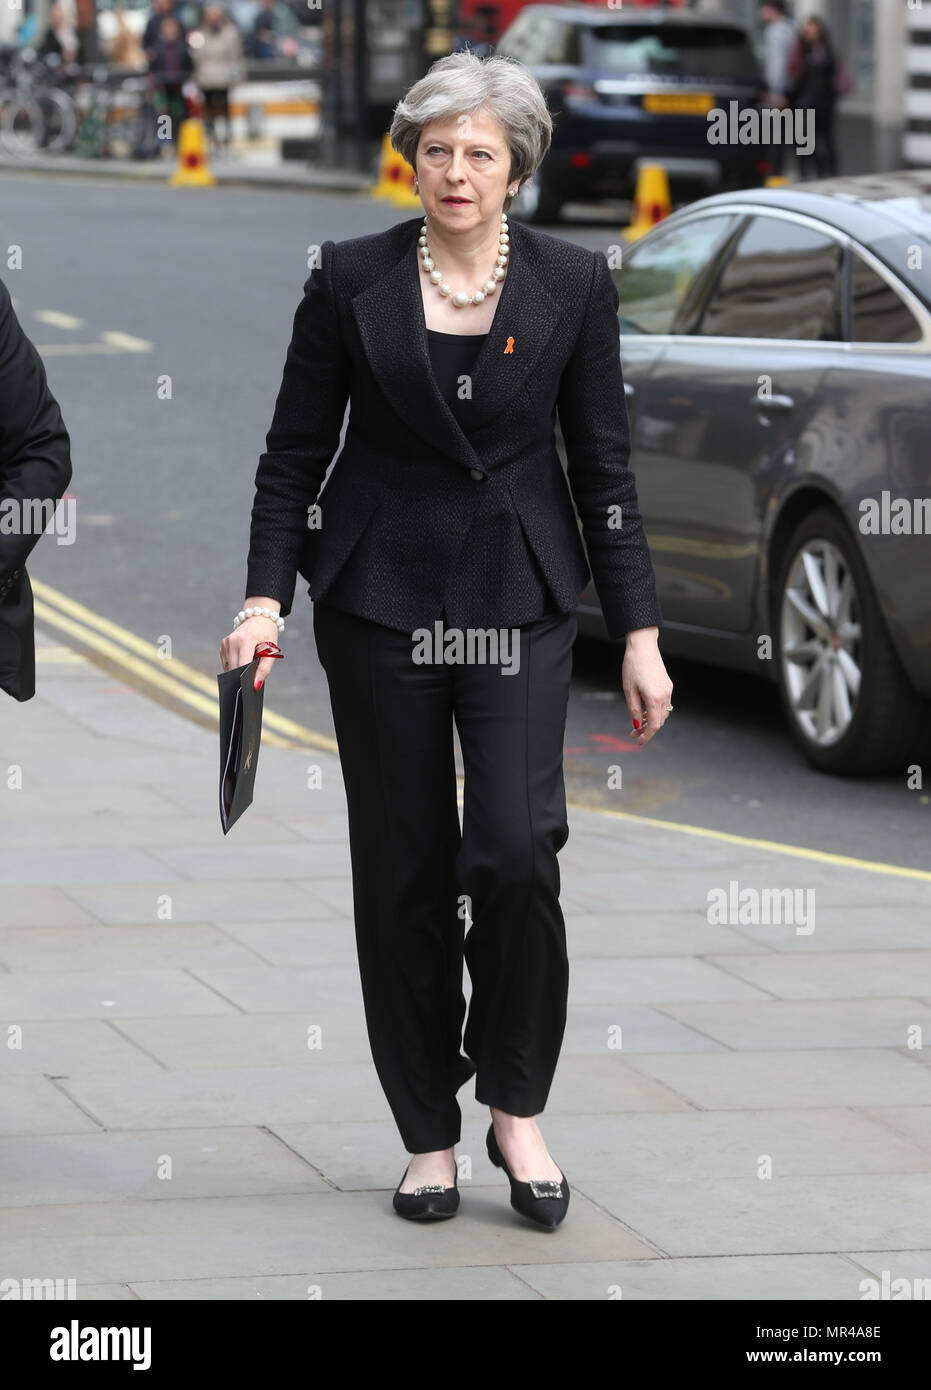 attends Stephen Lawrence memorial service St Martin-in-the-Fields Church, Trafalgar Square, London.  Featuring: Theresa May Where: London, United Kingdom When: 23 Apr 2018 Credit: Danny Martindale/WENN Stock Photo